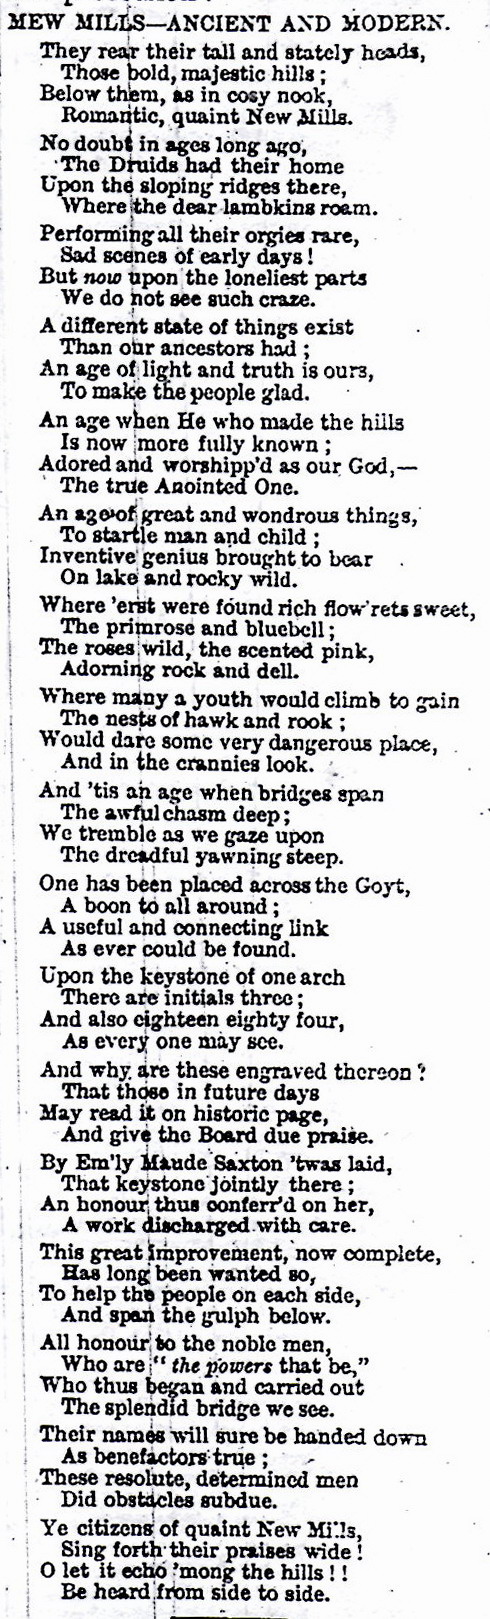 The Poem - note the reference to an inscription.